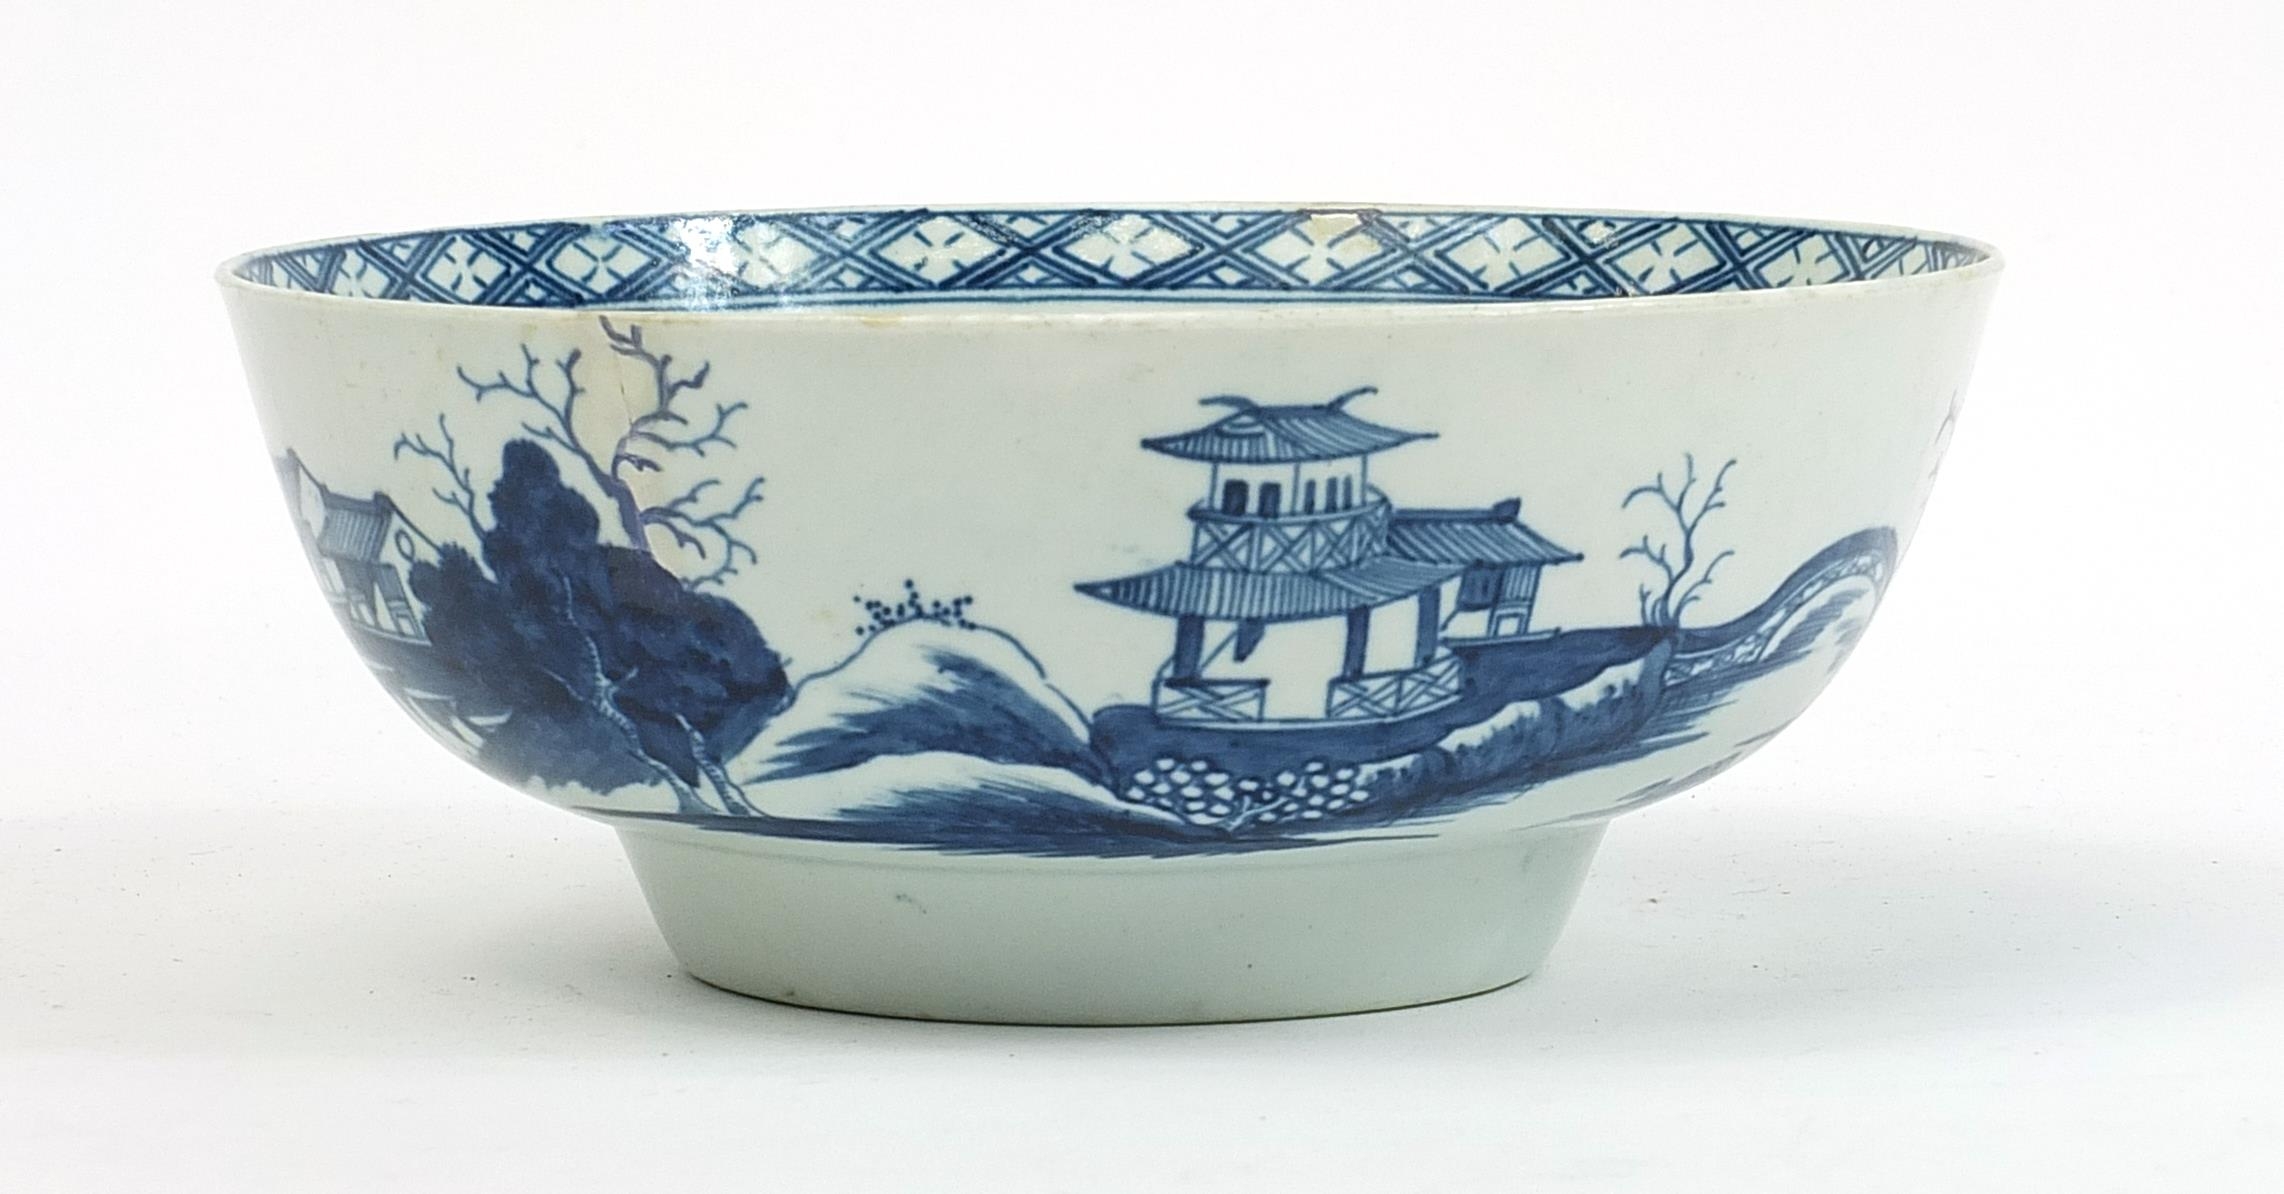 19th century English blue and white porcelain bowl hand painted in the chinoiserie manner with a